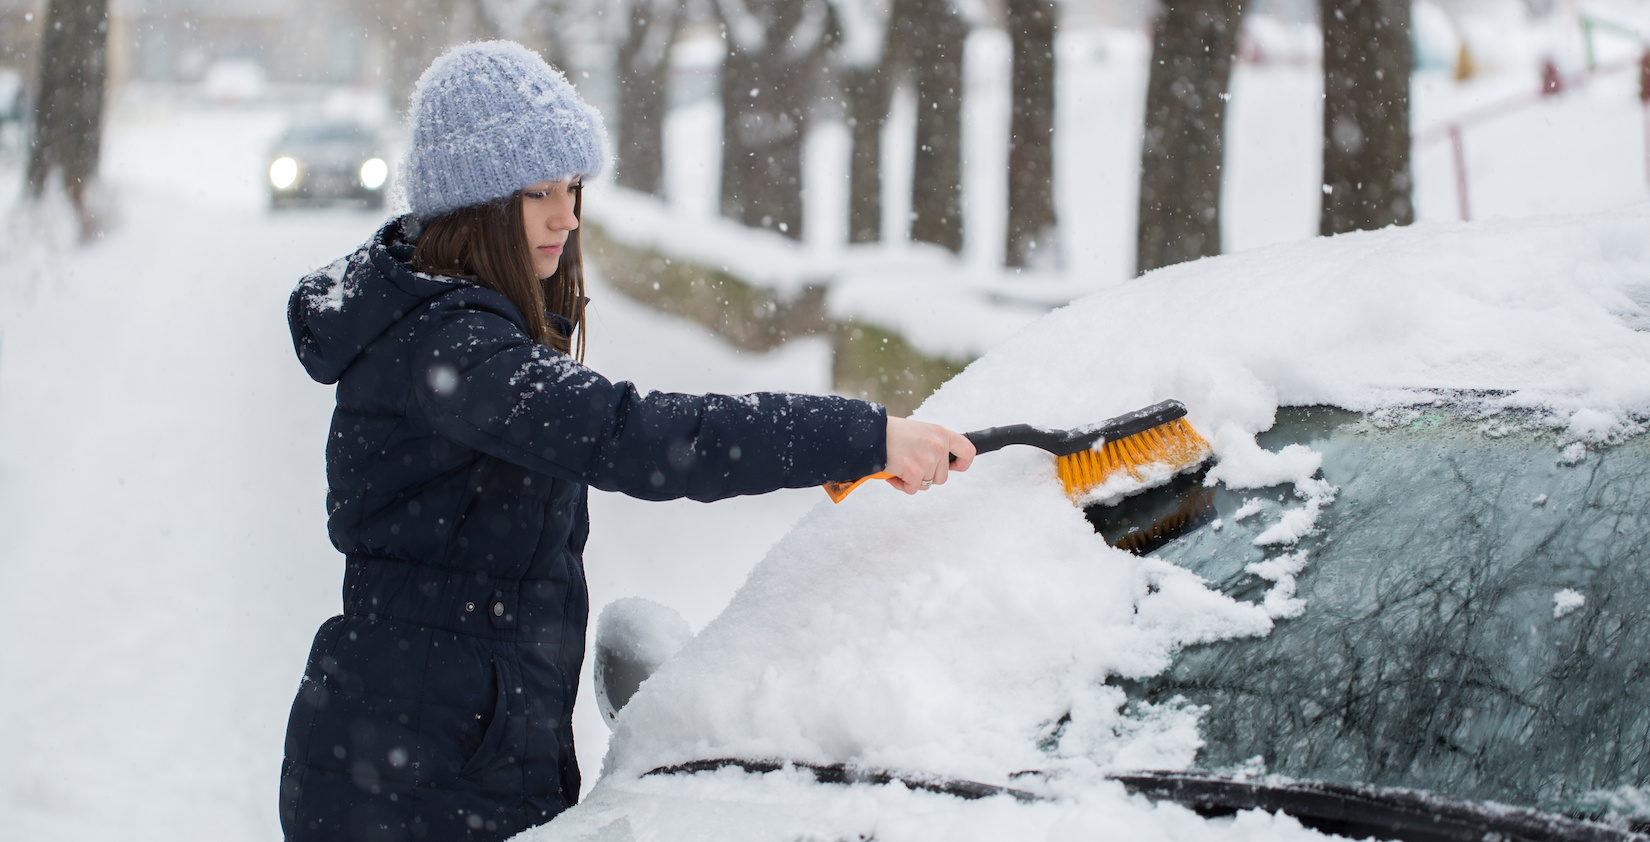 A person removing snow from her car